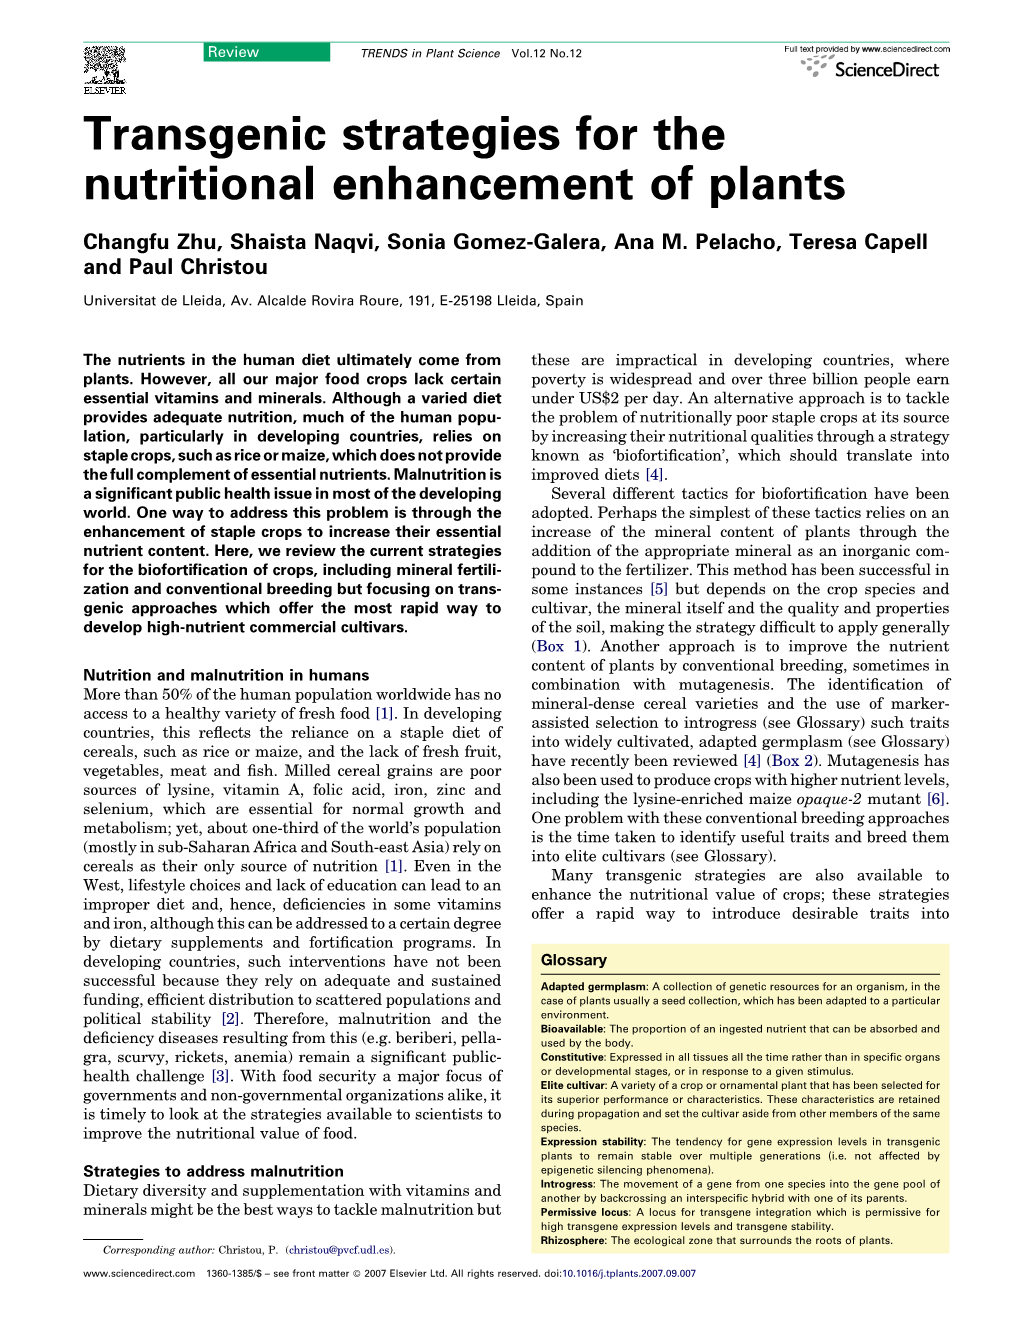 Transgenic Strategies for the Nutritional Enhancement of Plants